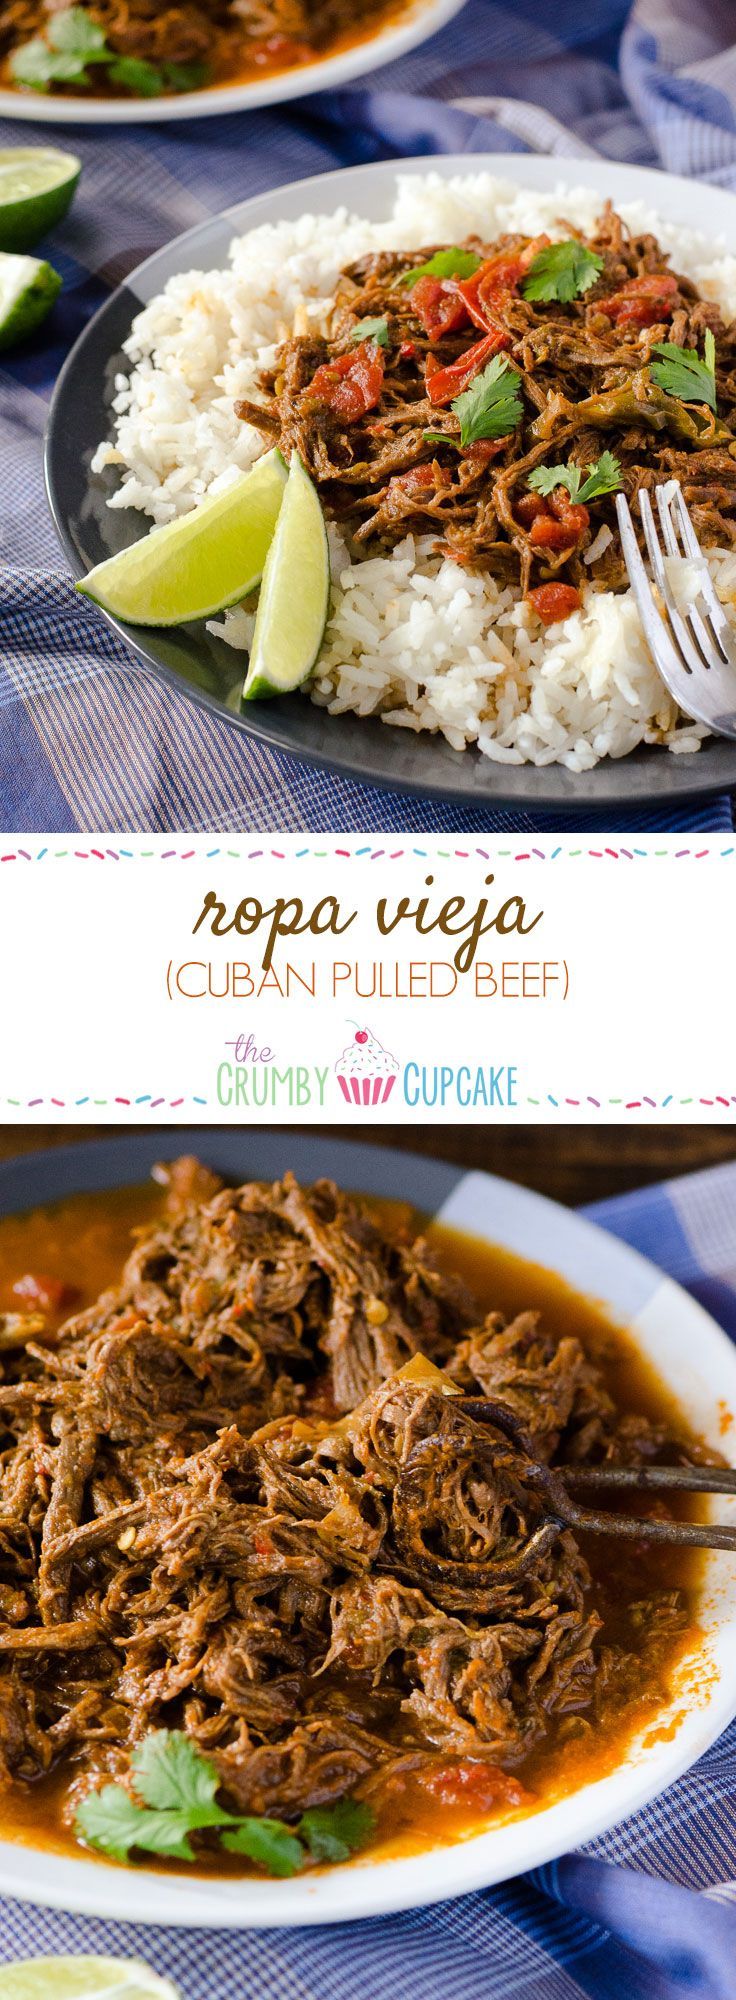 Spanish for ‘old clothes’ thanks to its shredded appearance, this flavorful Cuban dish is made with lean beef and makes for a